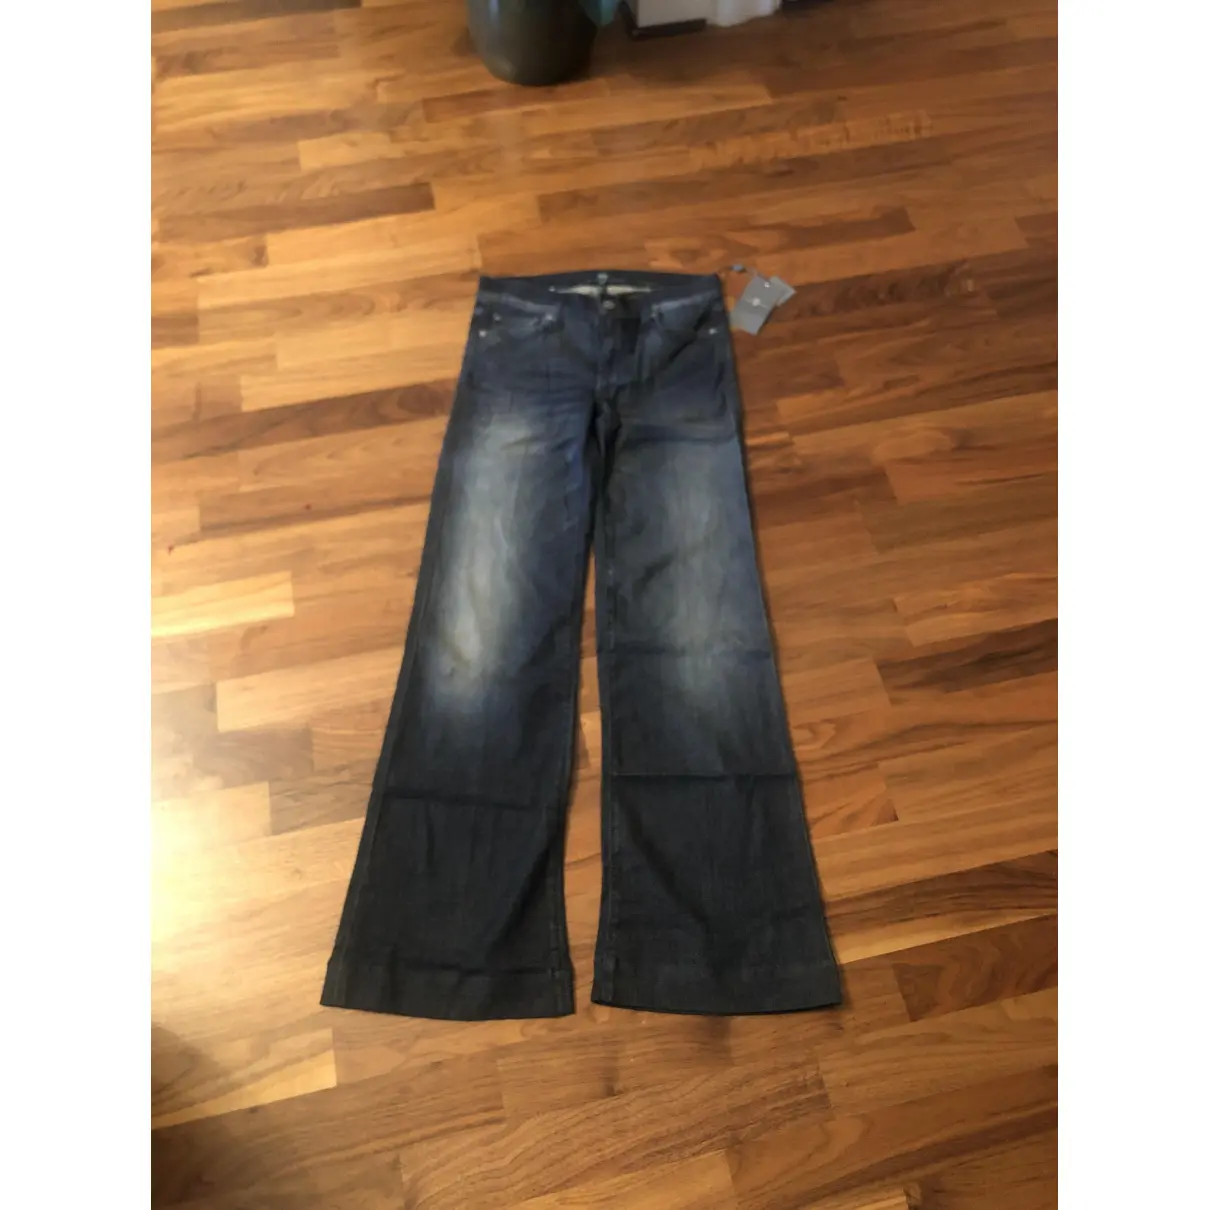 Buy 7 For All Mankind Cotton Jeans online